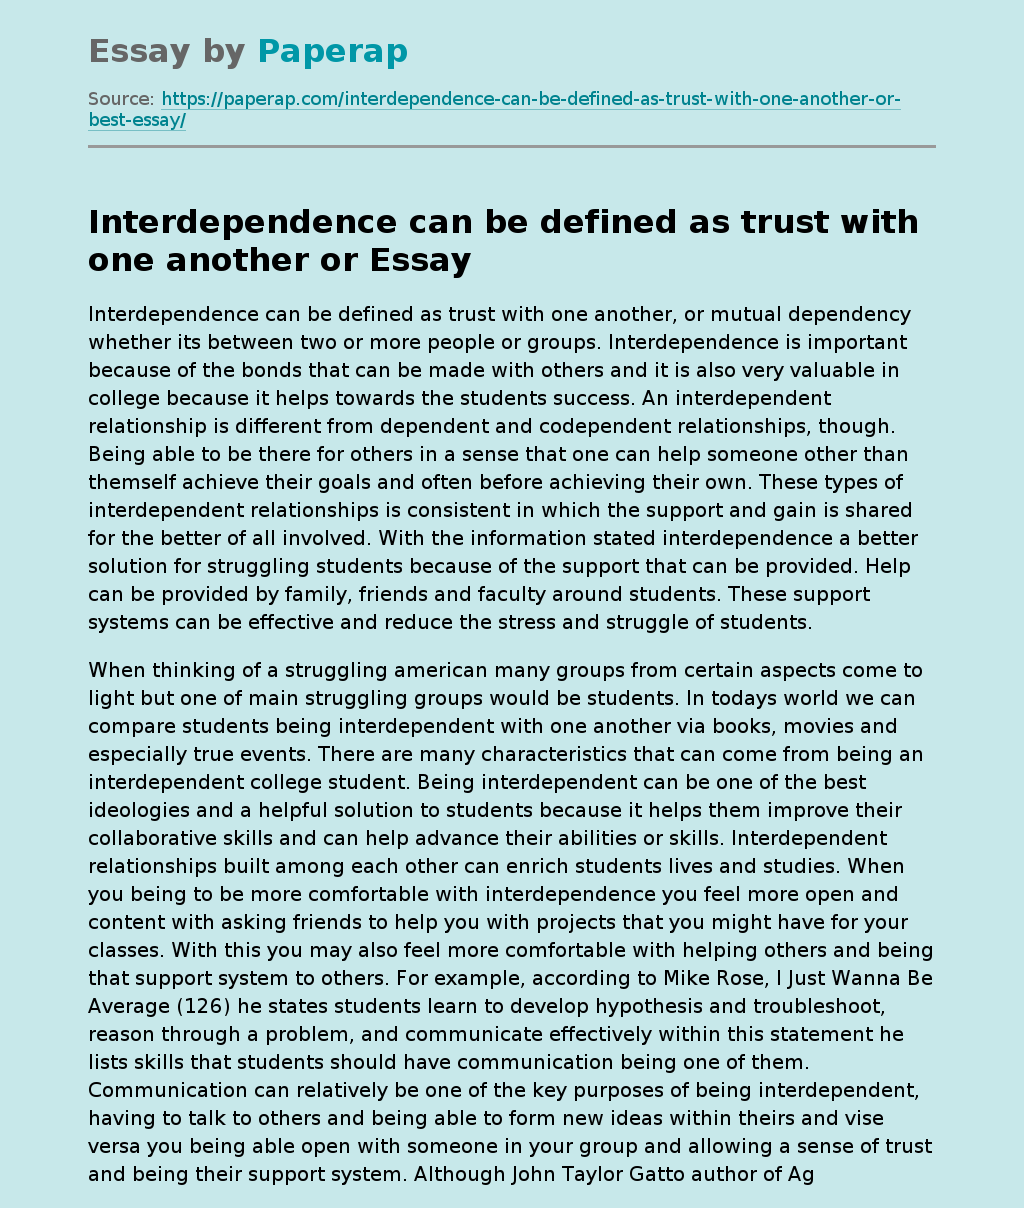 Interdependence can be defined as trust with one another or